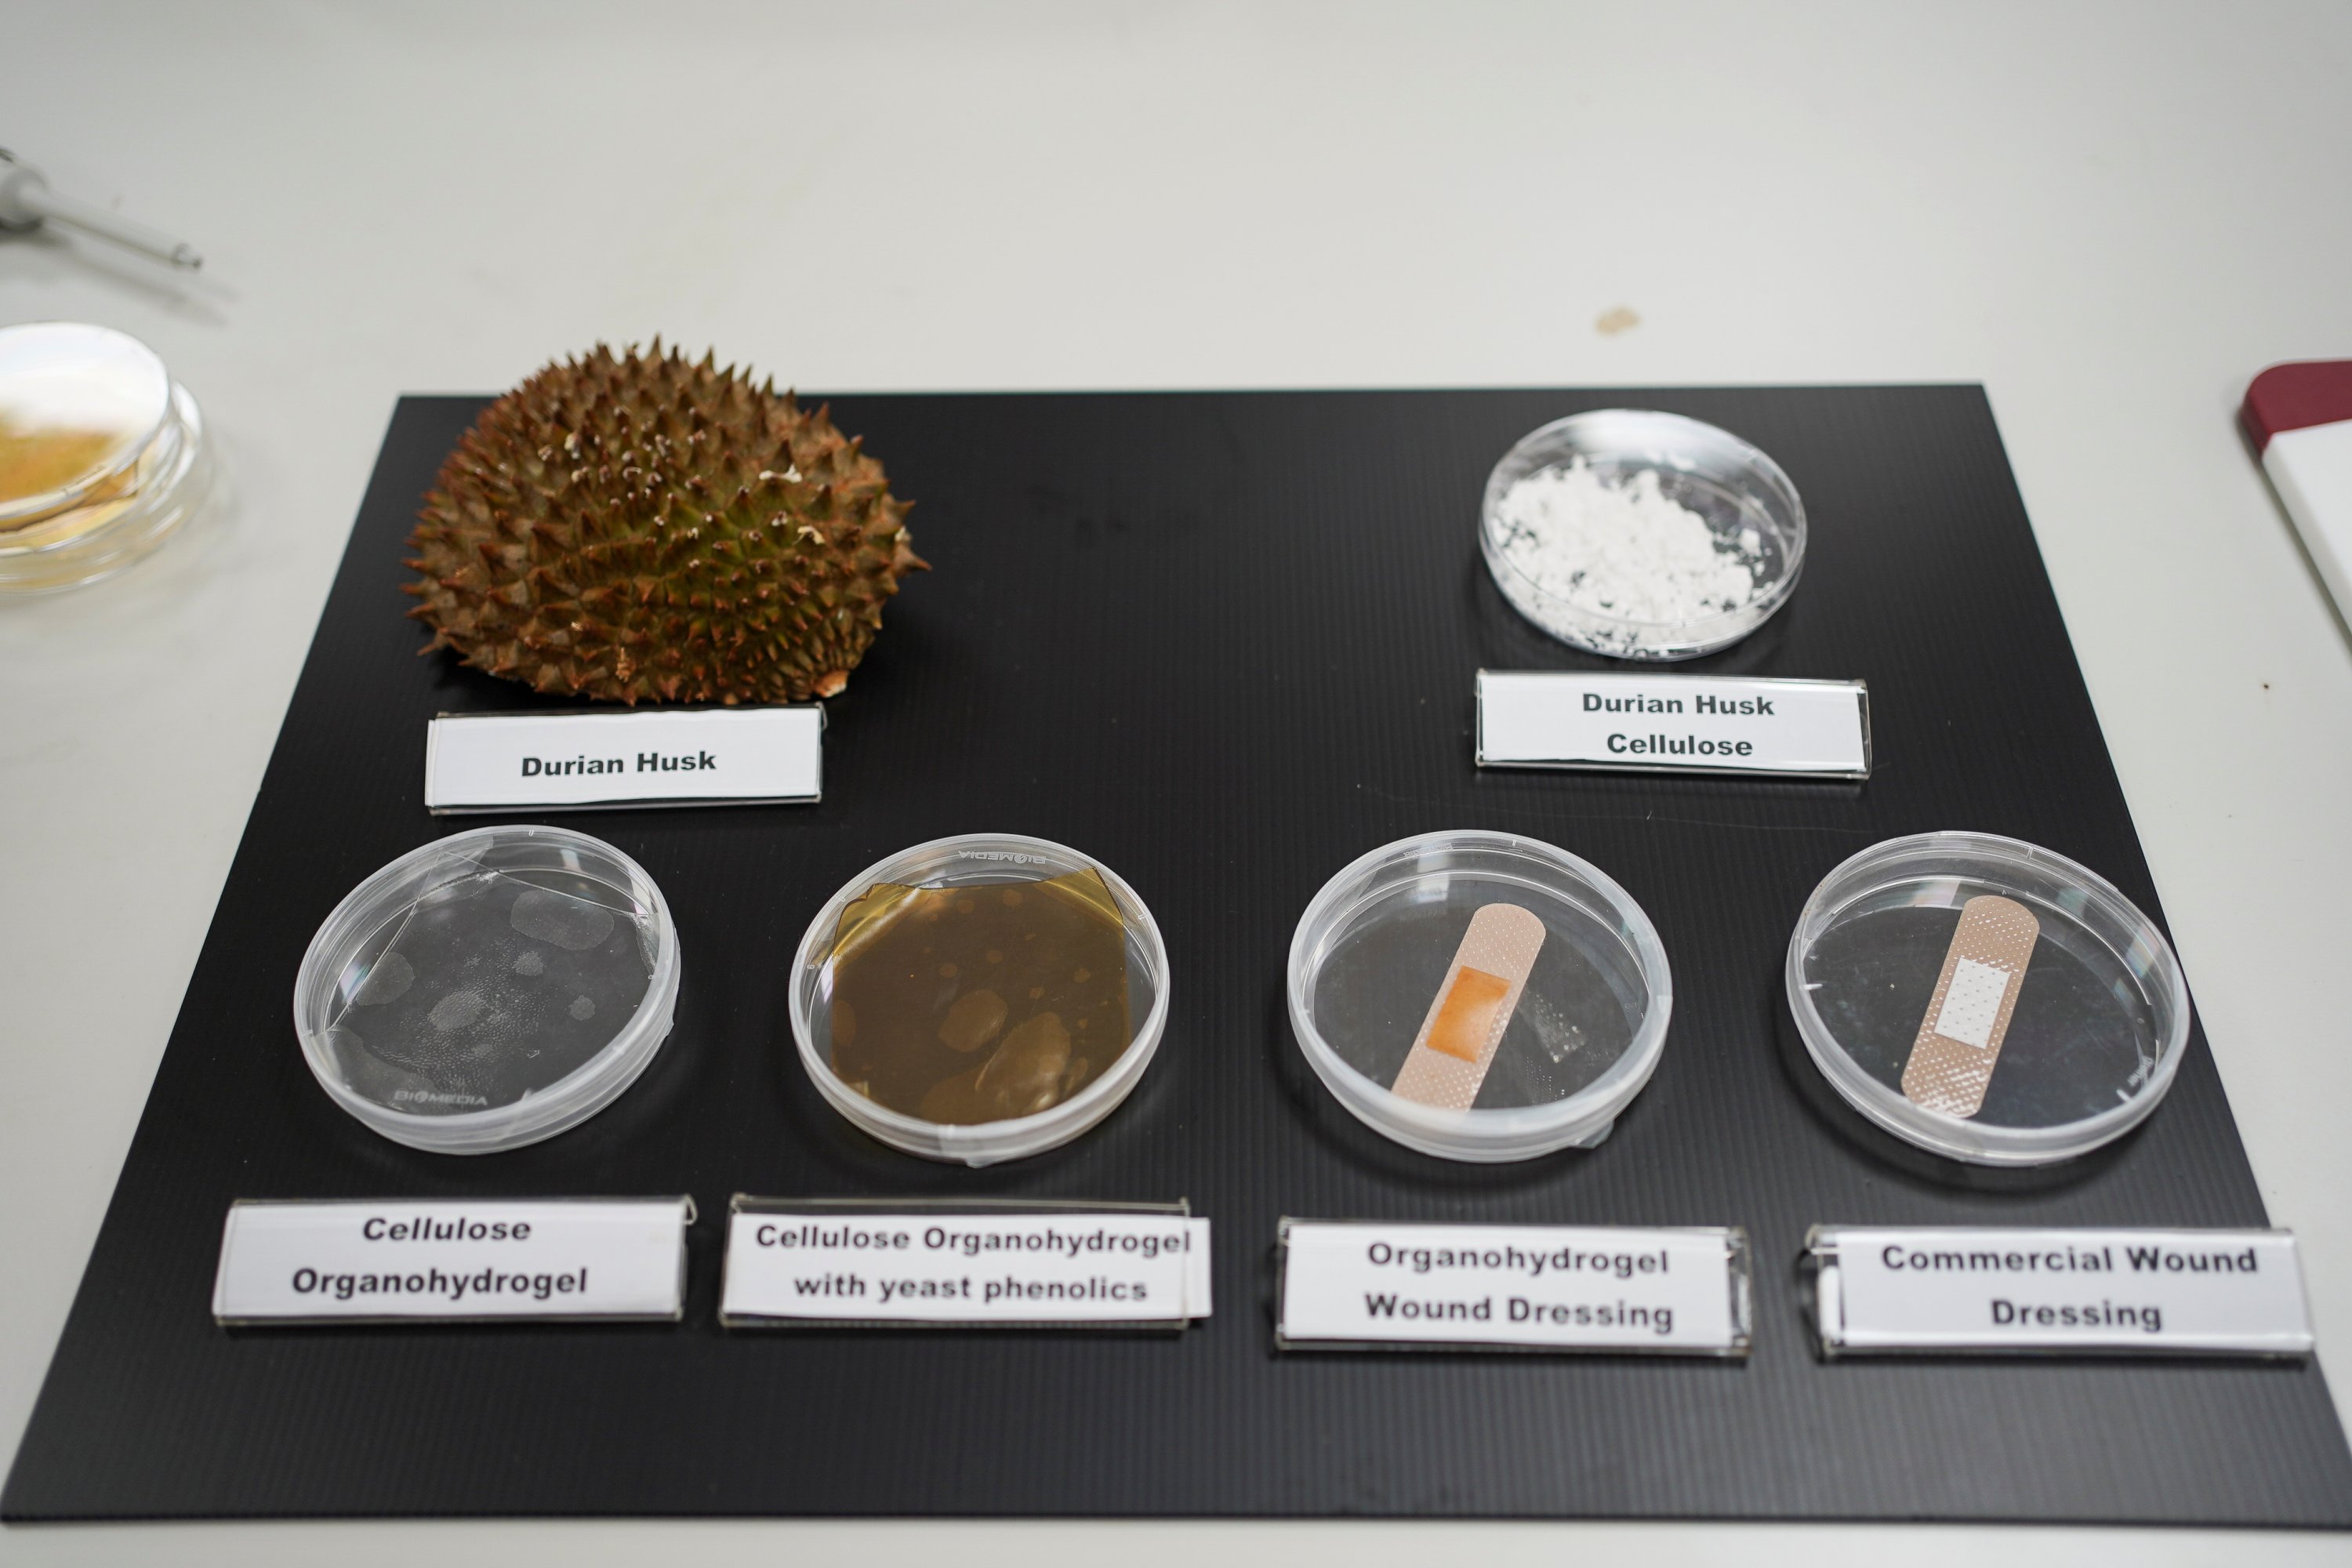 Petri dish containing different steps and procedures by Nanyang Technology University (NTU) to turn durian husks into antimicrobial bandages, in Singapore, Sept. 16, 2021. (Reuters Photo)